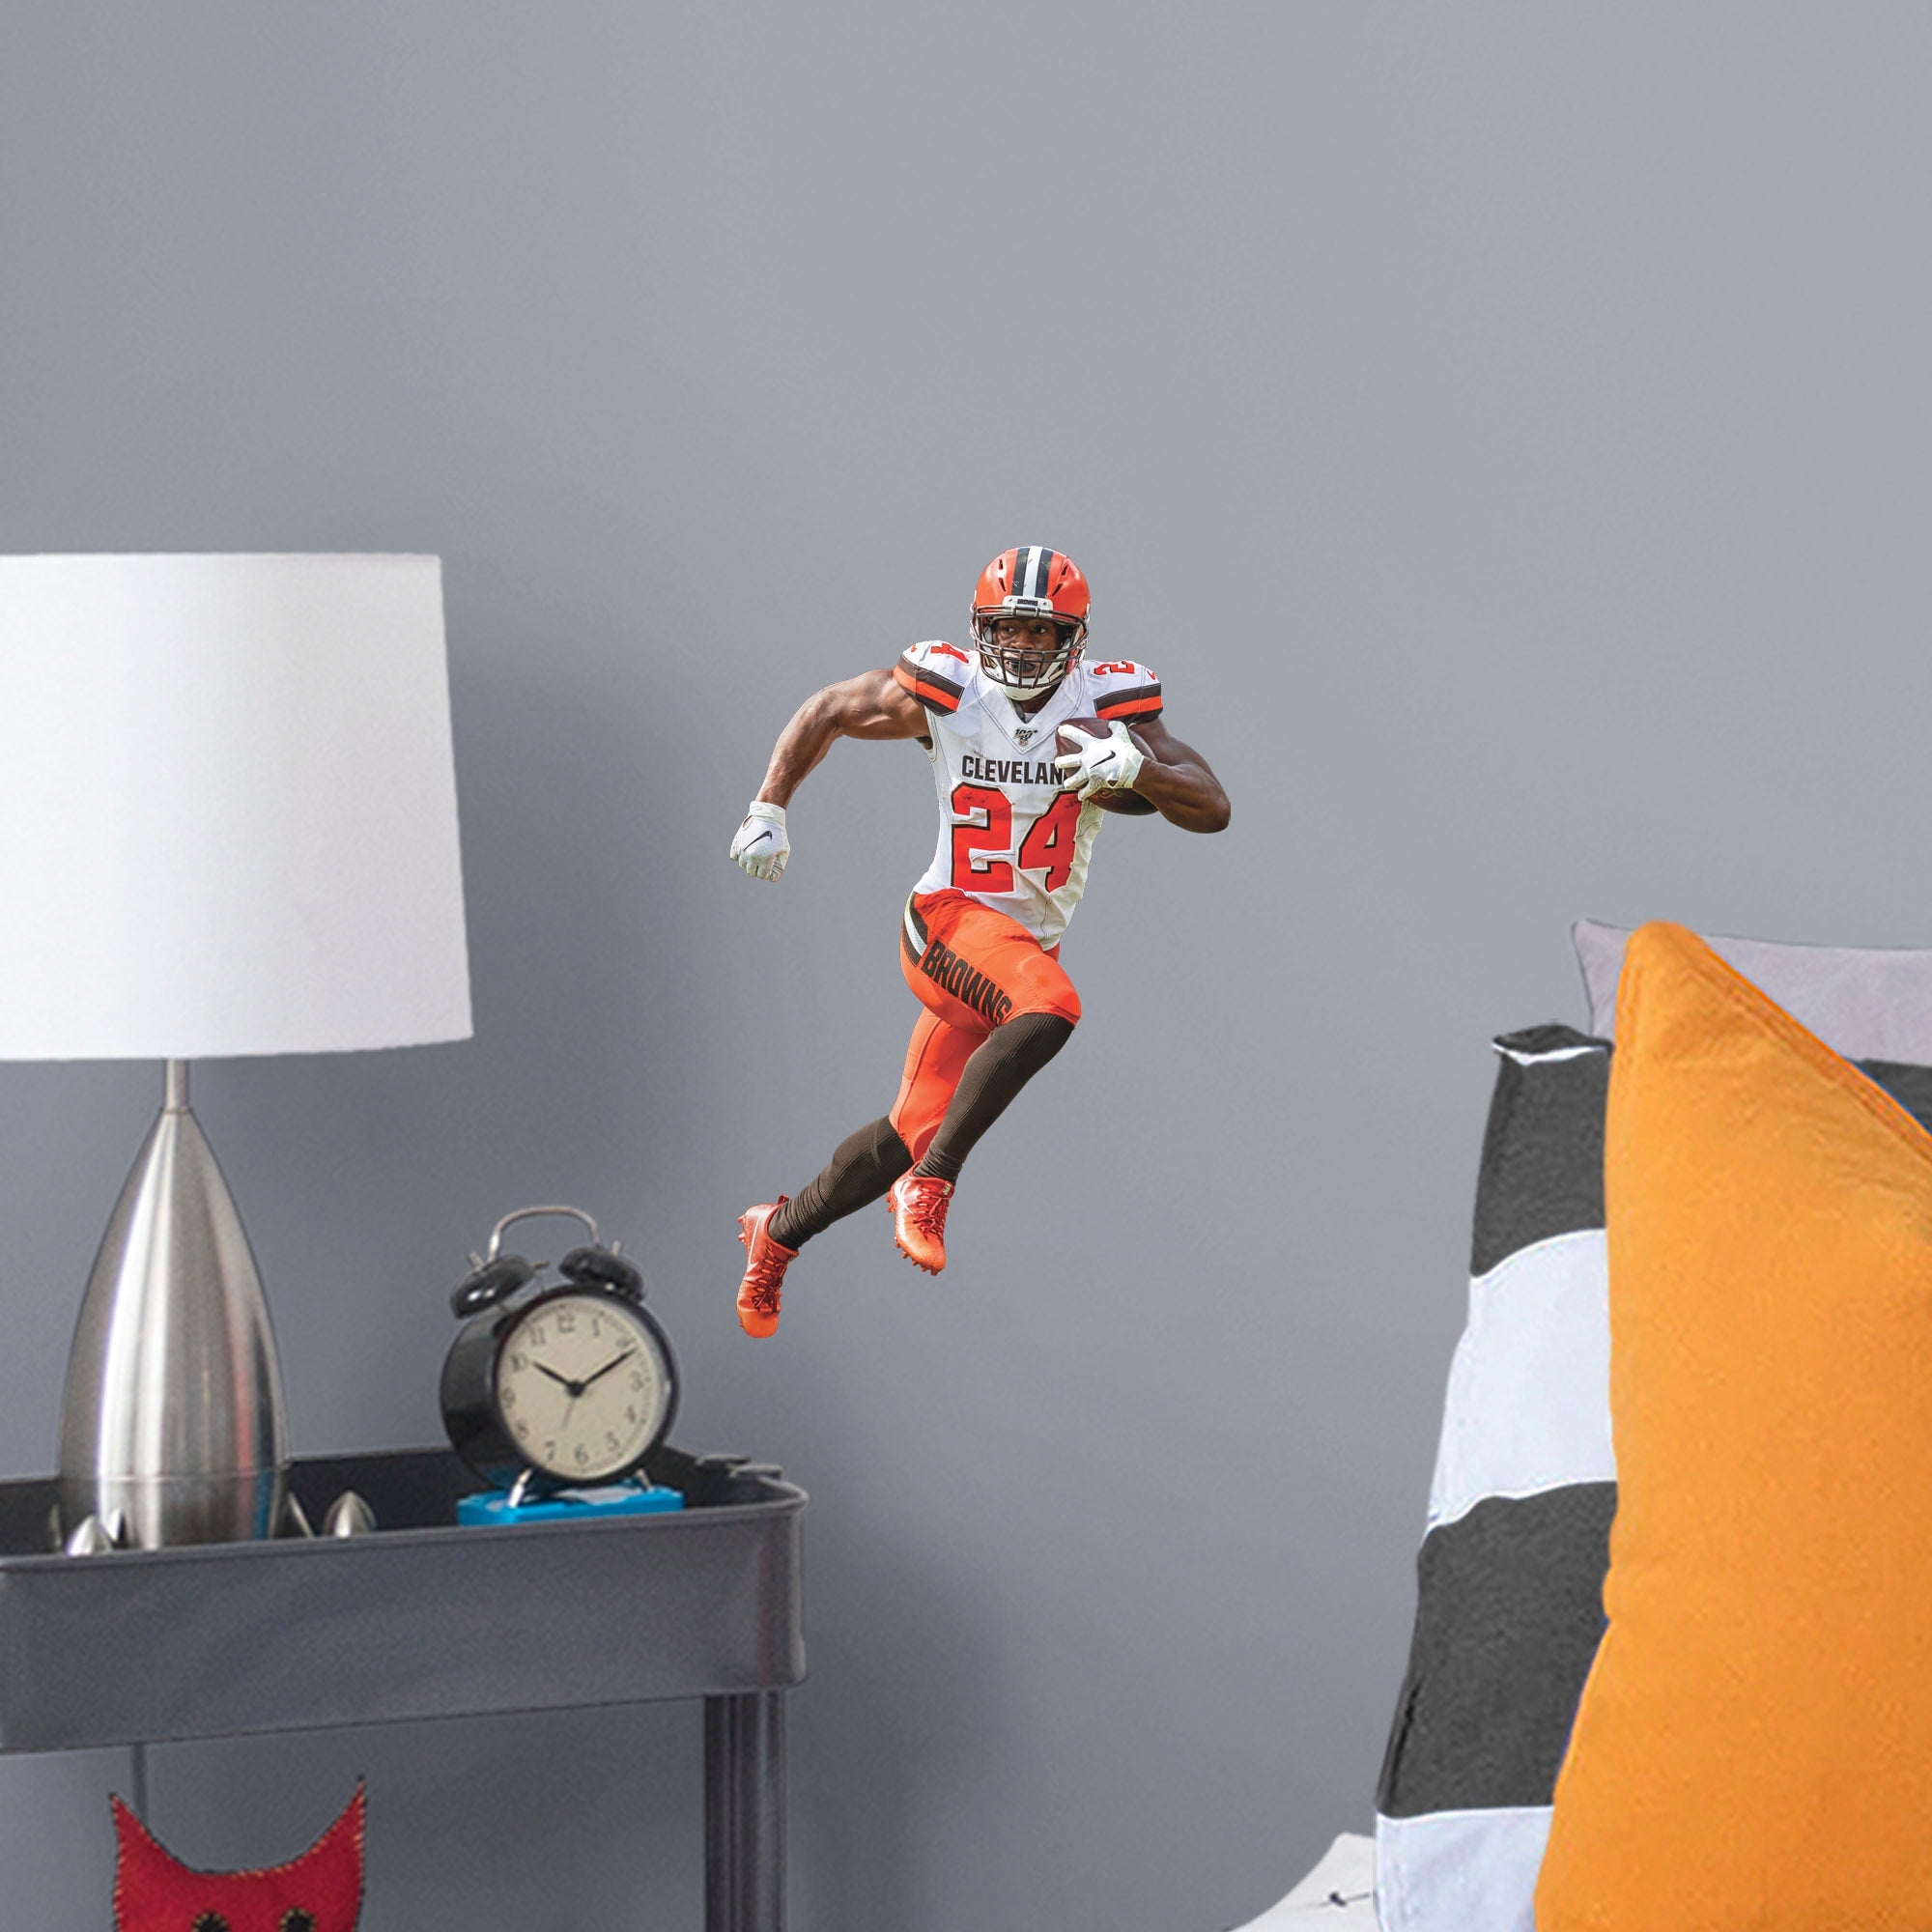 Nick Chubb for Cleveland Browns: Gamebreaker - Officially Licensed NFL Removable Wall Decal Large by Fathead | Vinyl